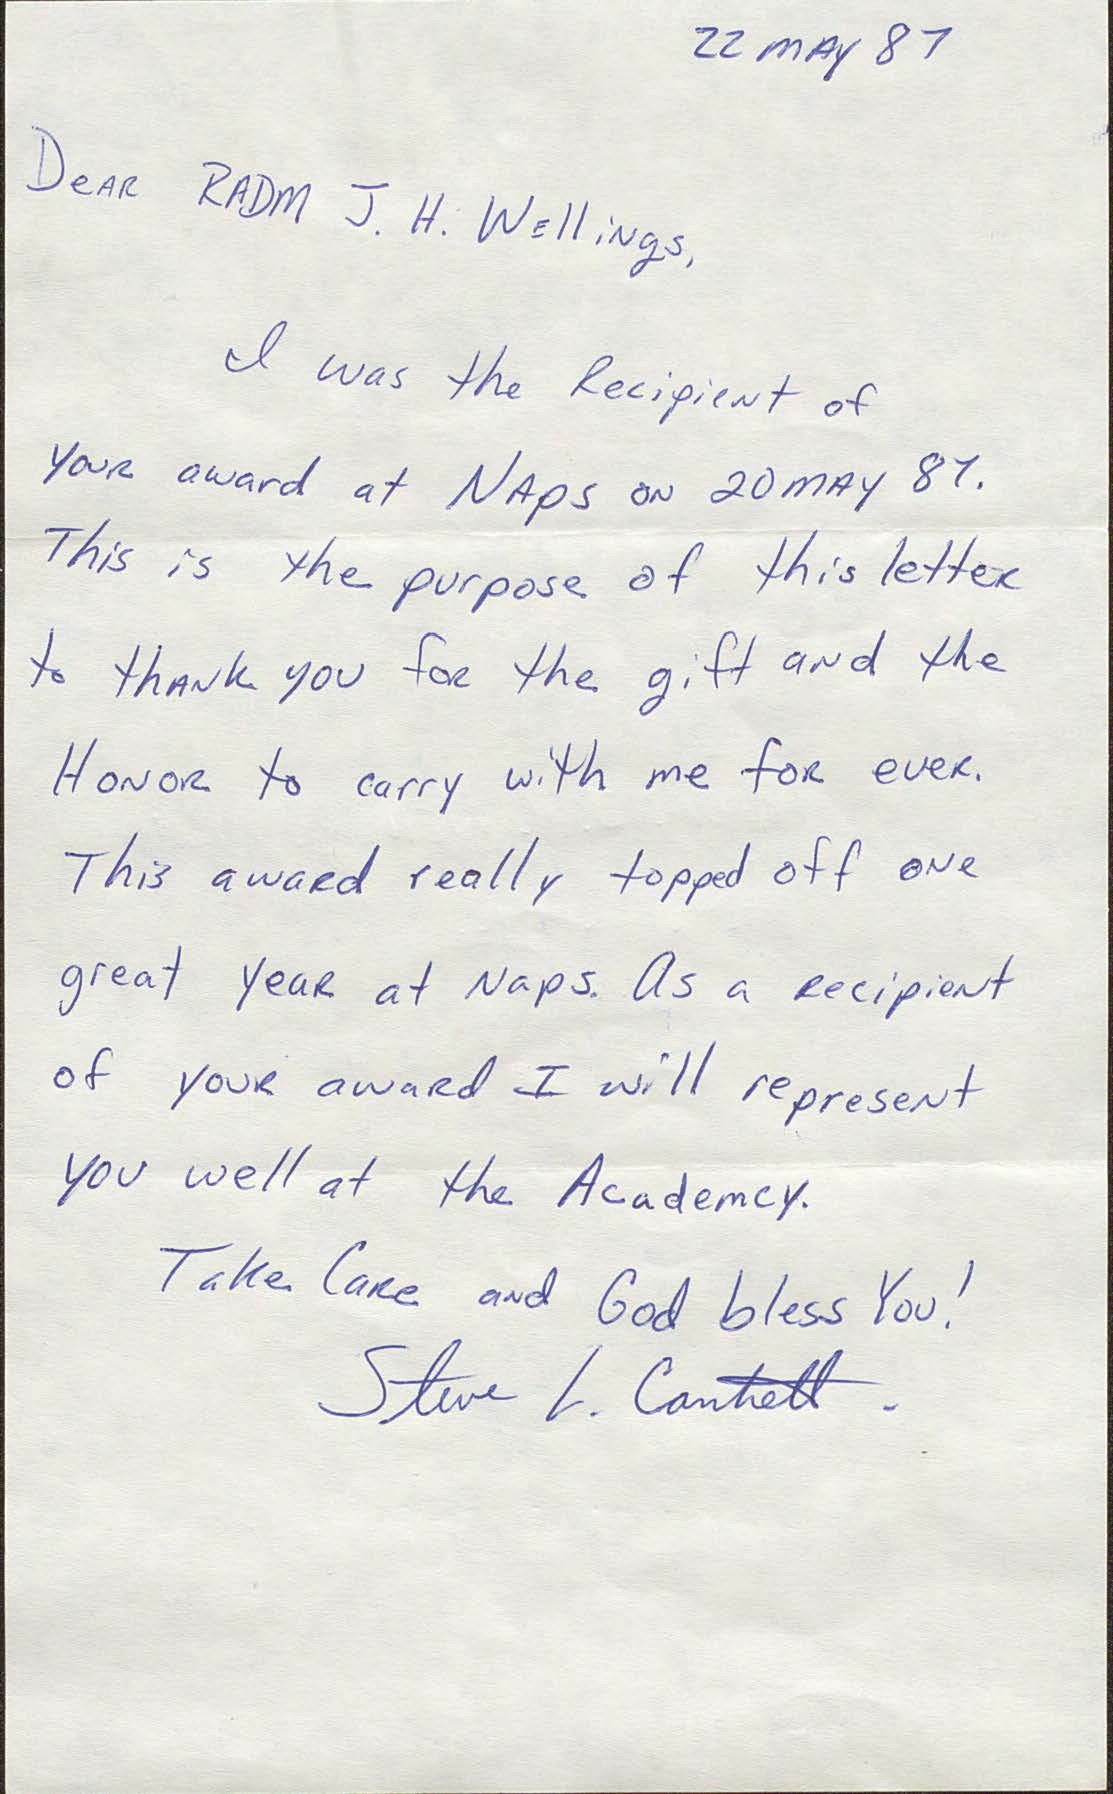 Letter from Corporal Steve L. Cantrell to RADM Joseph H. Wellings